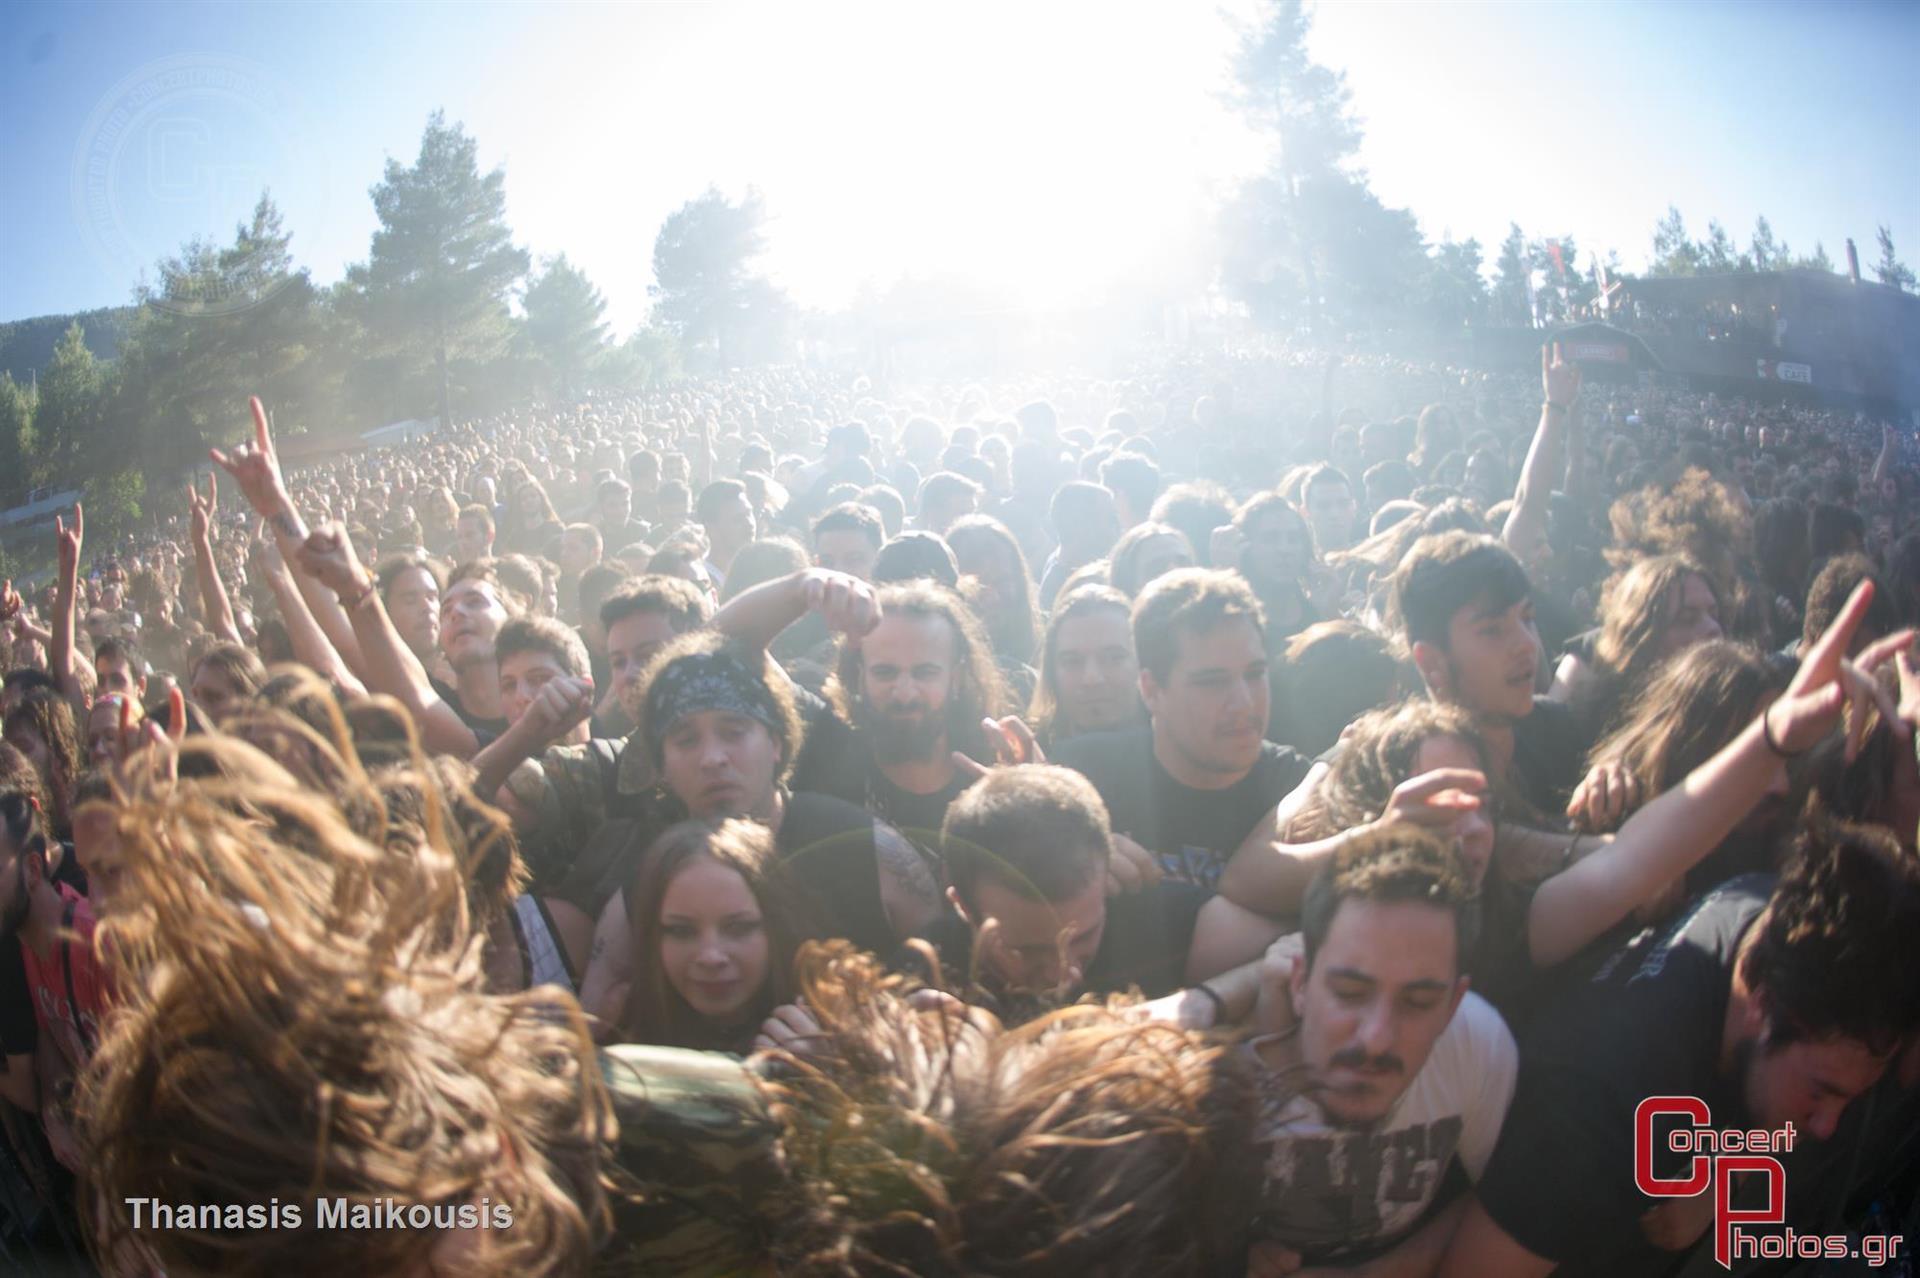 Rockwave 2015 - Day 3-Rockwave 2015 - Day 3 photographer: Thanasis Maikousis - ConcertPhotos - 20150704_1811_18